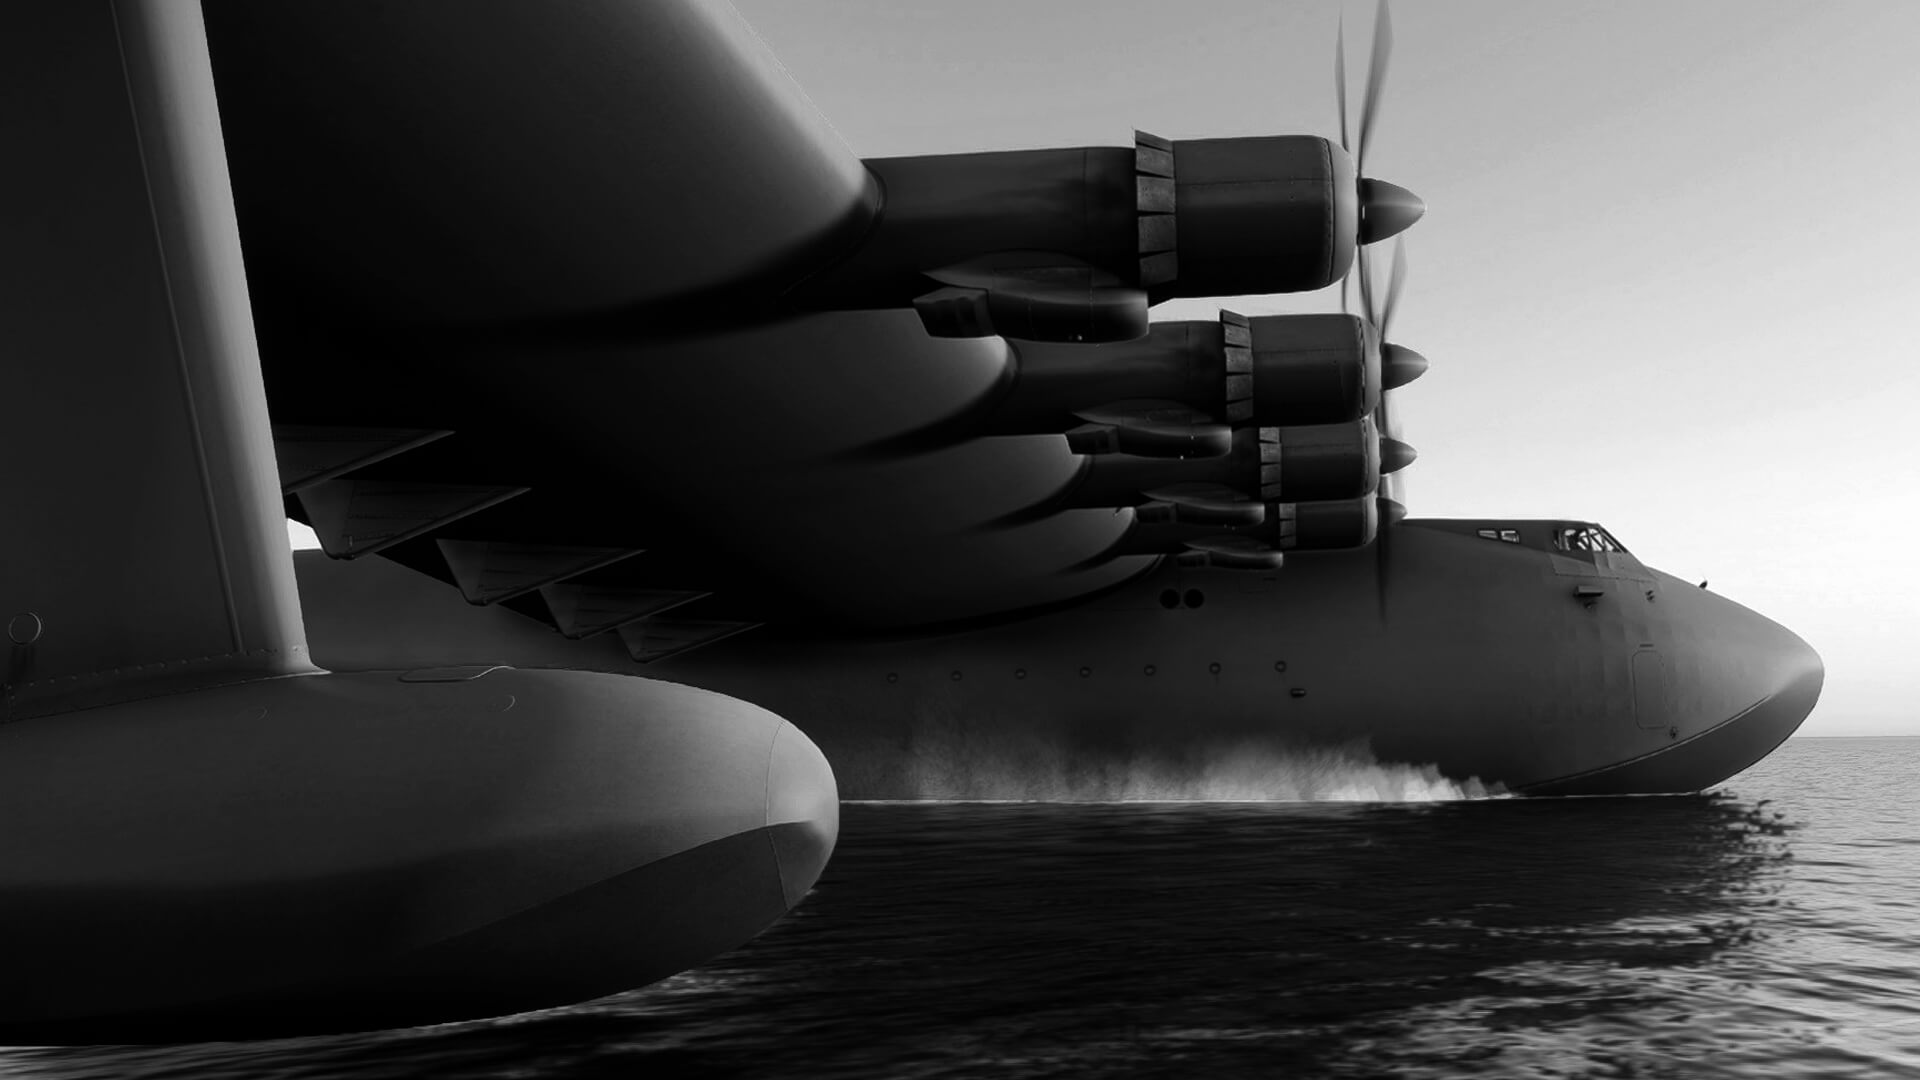 Spruce Goose plane in the water in black and white coloring